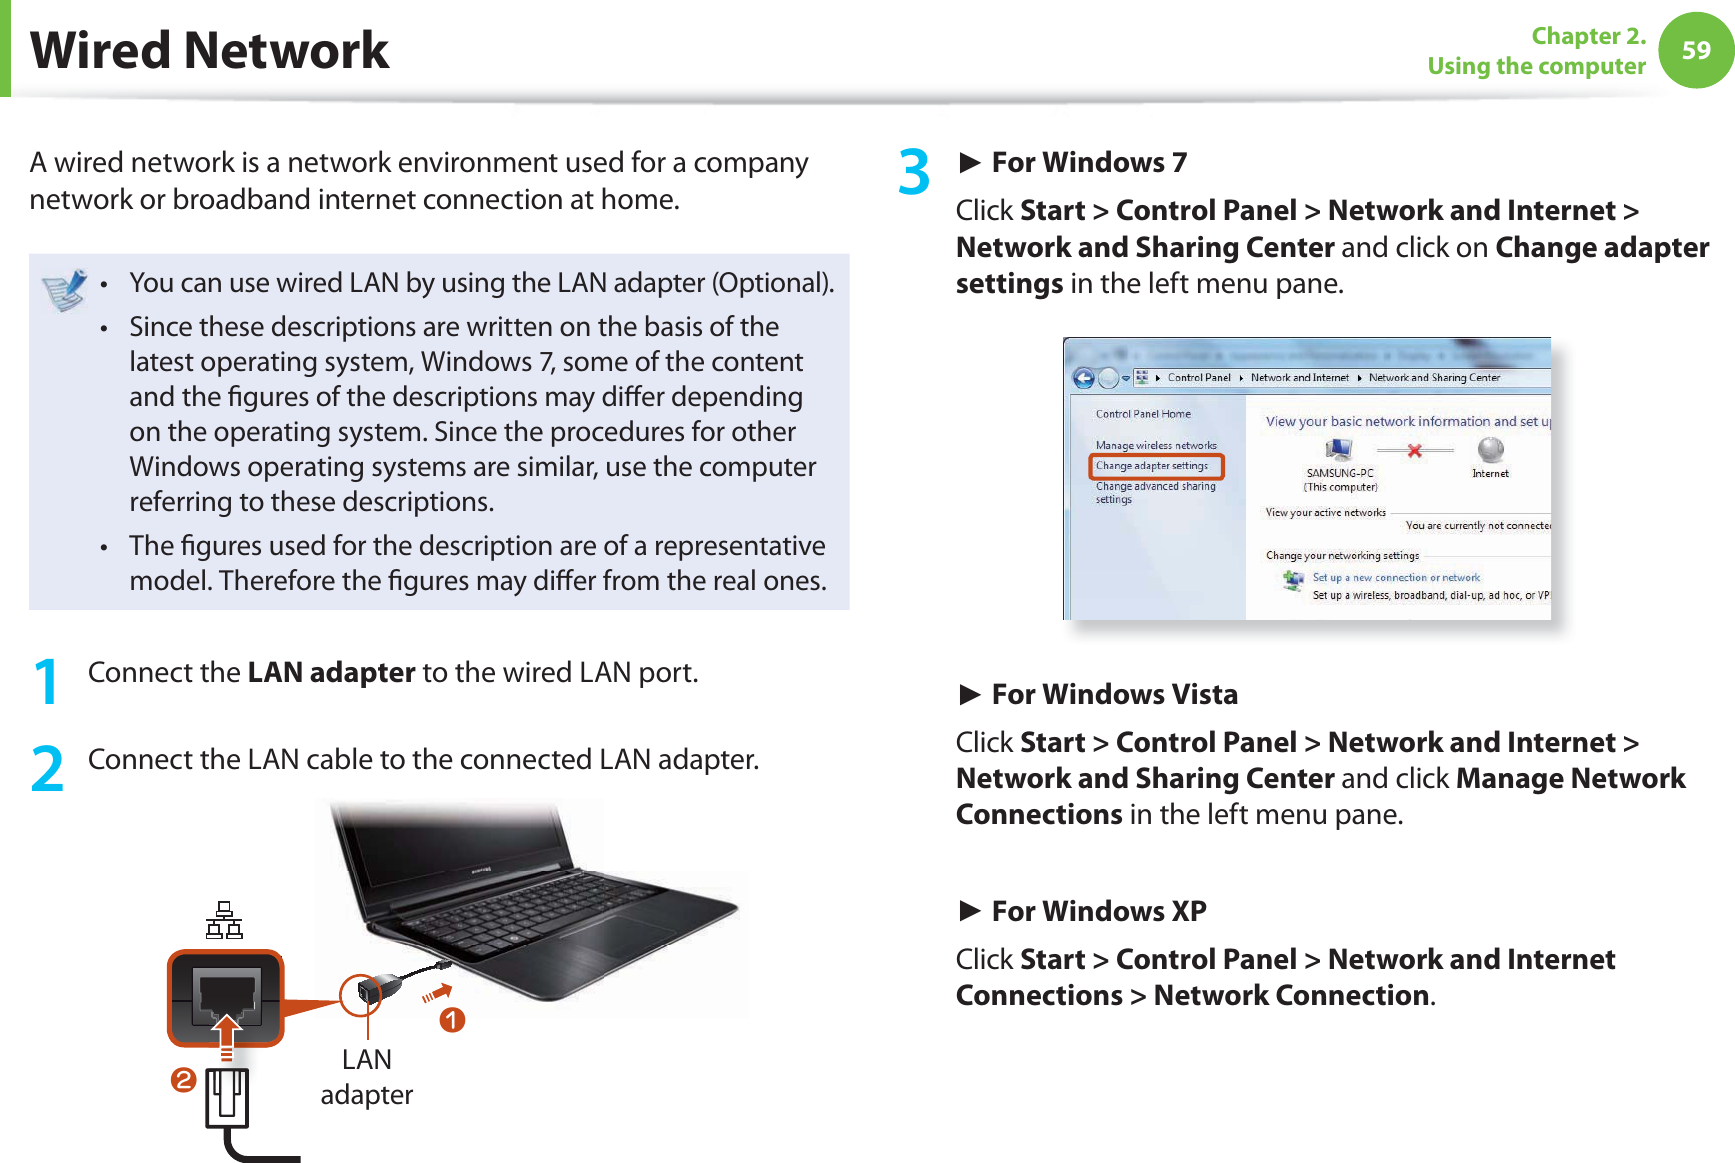 59Chapter 2. Using the computer Wired  NetworkA wired network is a network environment used for a company network or broadband internet connection at home.You can use wired LAN by using the LAN adapter (Optional).t Since these descriptions are written on the basis of the t latest operating system, Windows 7, some of the content and the  gures of the descriptions may di er depending on the operating system. Since the procedures for other Windows operating systems are similar, use the computer referring to these descriptions.The  gures used for the description are of a representative t model. Therefore the  gures may di er from the real ones.1 Connect the LAN adapter to the wired LAN port.2  Connect the LAN cable to the connected LAN adapter.LAN adapternl3 ► For Windows 7Click Start &gt; Control Panel &gt; Network and Internet &gt; Network and Sharing Center and click on Change adapter settings in the left menu pane.► For Windows VistaClick Start &gt; Control Panel &gt; Network and Internet &gt; Network and Sharing Center and click Manage Network Connections in the left menu pane.► For Windows XPClick Start &gt; Control Panel &gt; Network and Internet Connections &gt; Network Connection.